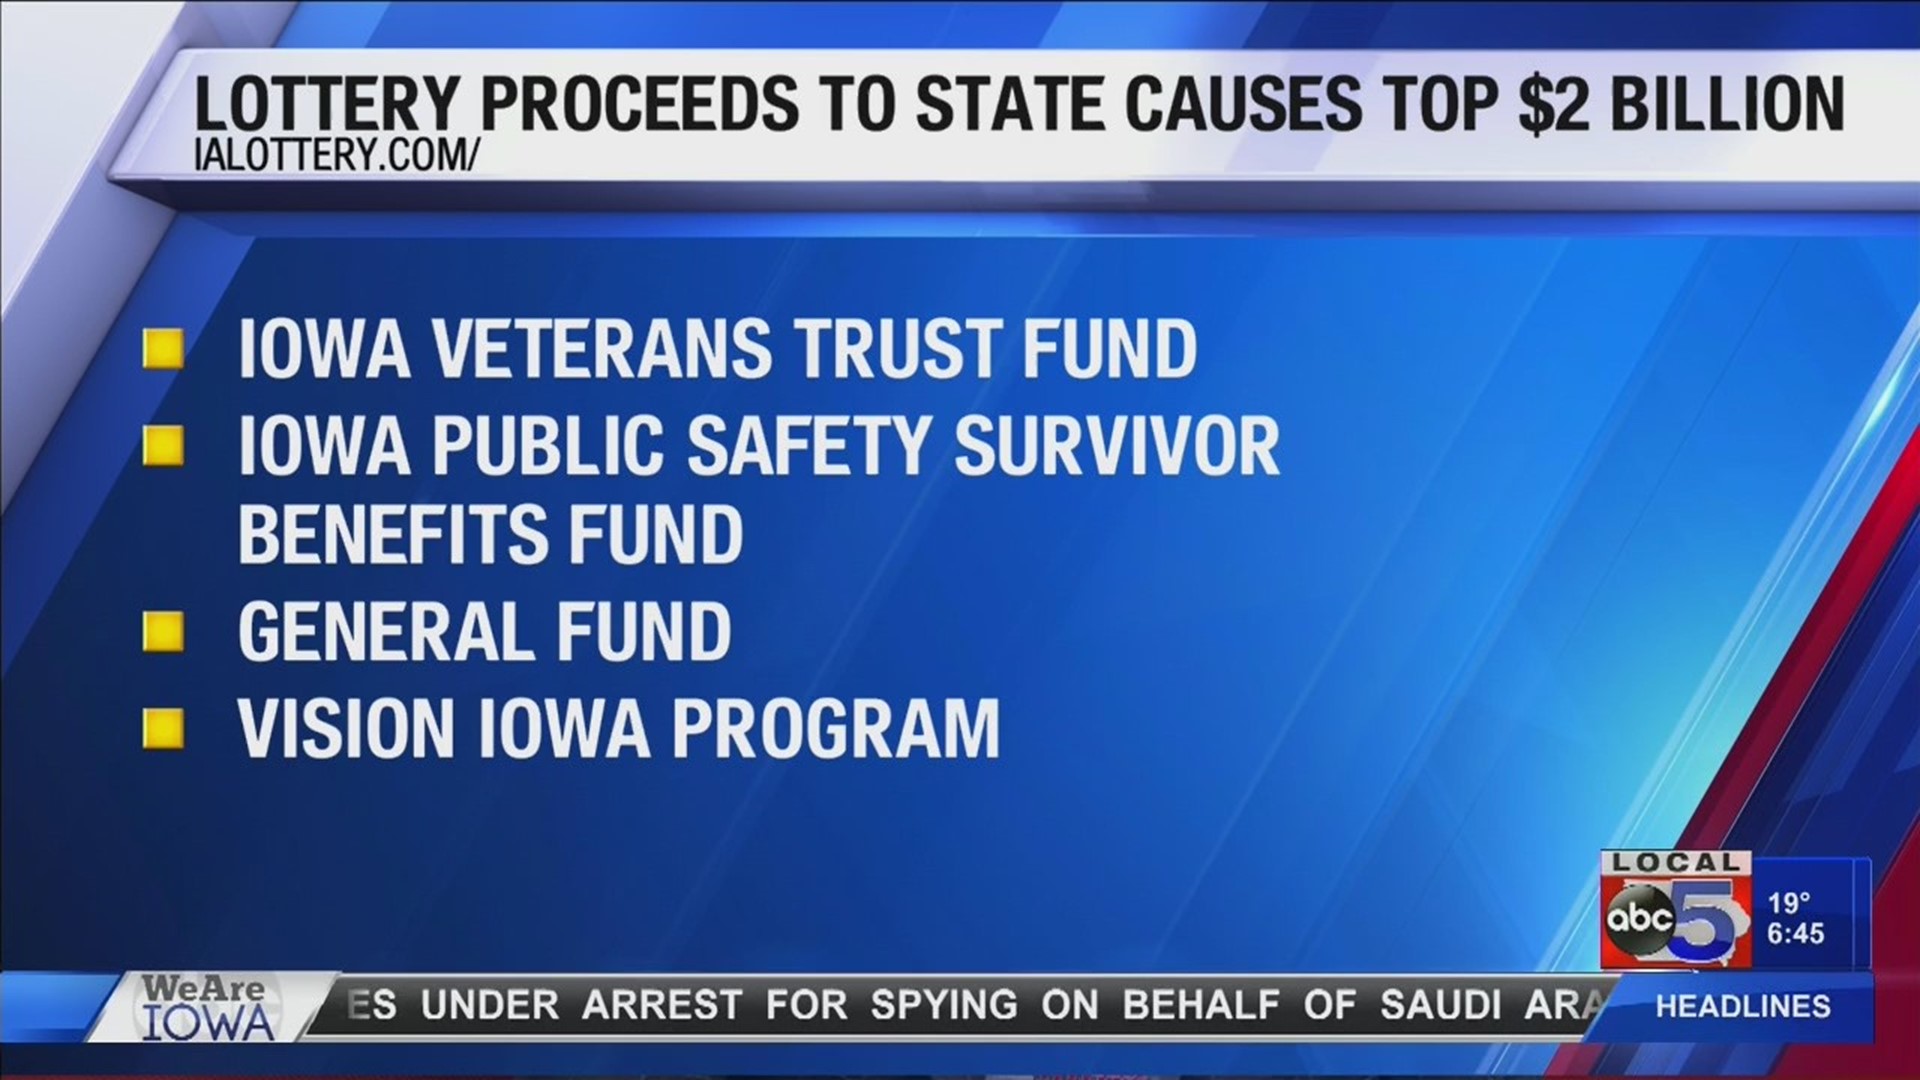 Today on Good Morning Iowa, Iowa Lottery CEO Matt Strawn announced that more than two billion dollars has been raised for important state causes.